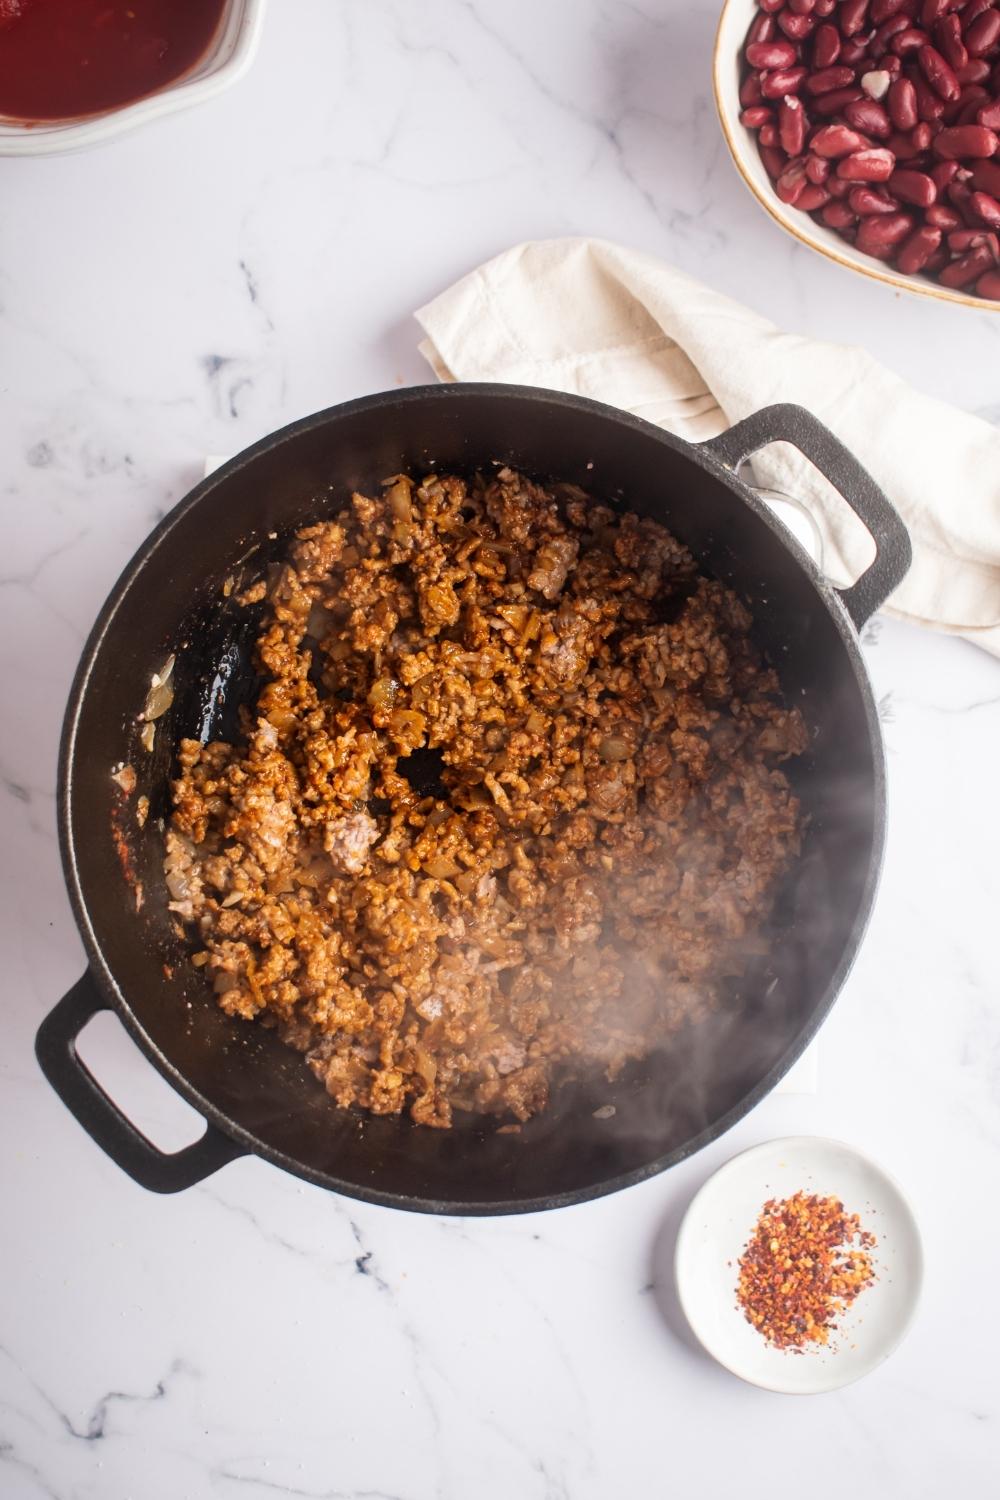 An overhead view of a skillet with cooked ground beef steaming.